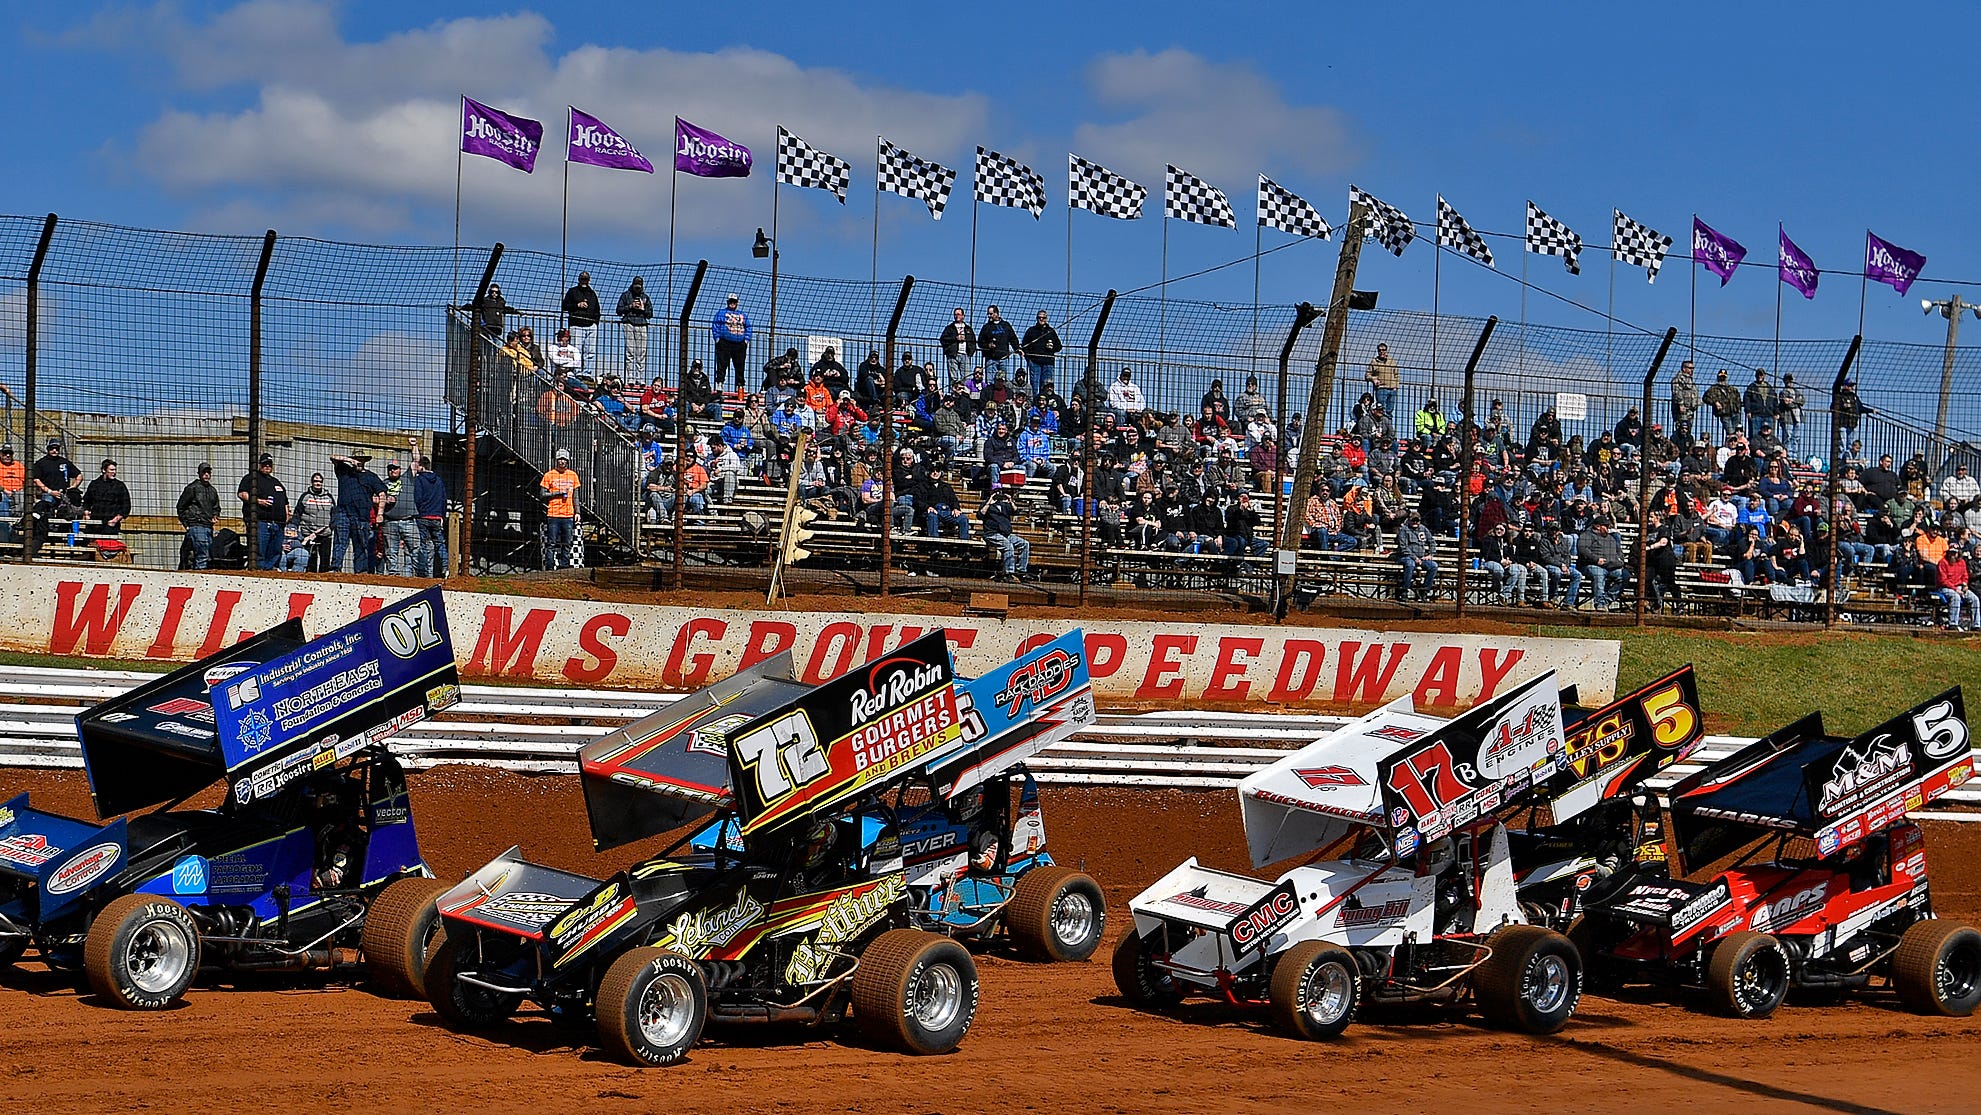 With Williams Grove's return, weekend racing schedule back to normal